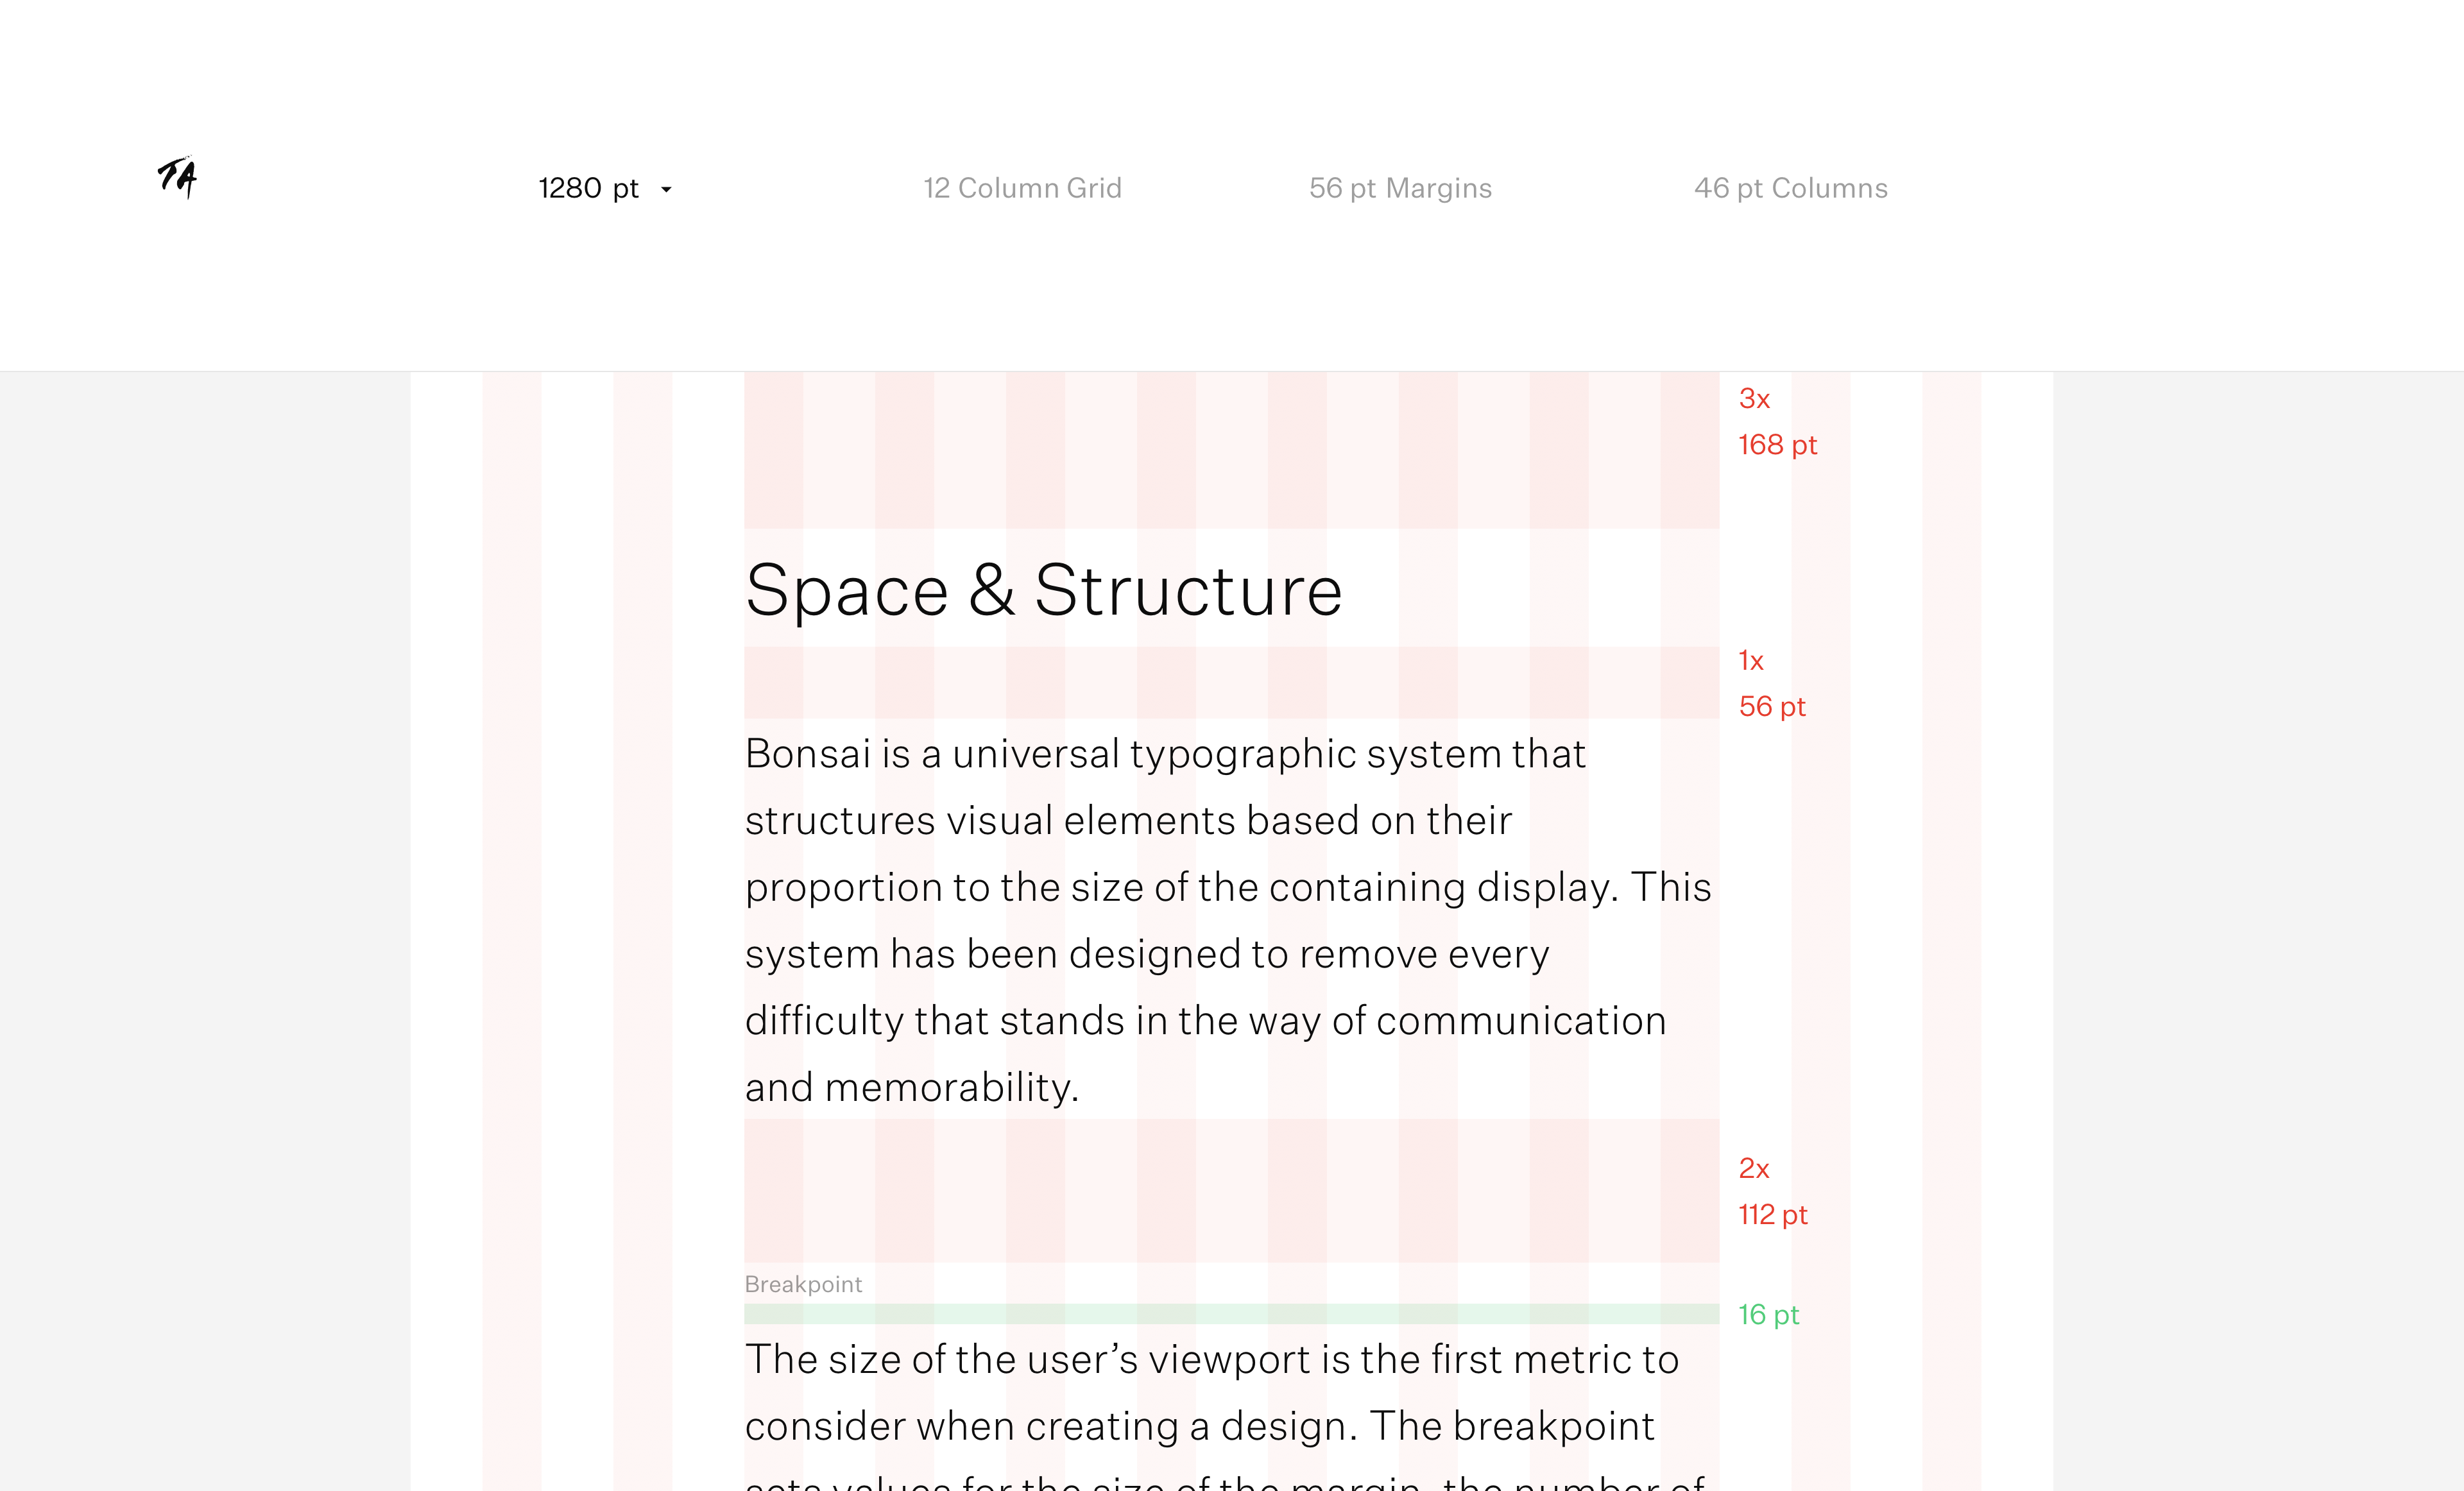 A screenshot of the Typography page from the Bonsai microsite. The small T A logo is in the top left corner. The page features a tool for determining the layout of a page using Bonsai at different device widths. A bar along the top features a dropdown for selecting width, and indicators for the number of columns and widths of those columns and margins. Below that is an example page with the column structure, spacing and type sizes shown.